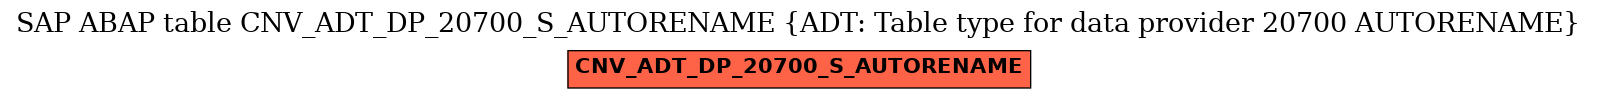 E-R Diagram for table CNV_ADT_DP_20700_S_AUTORENAME (ADT: Table type for data provider 20700 AUTORENAME)